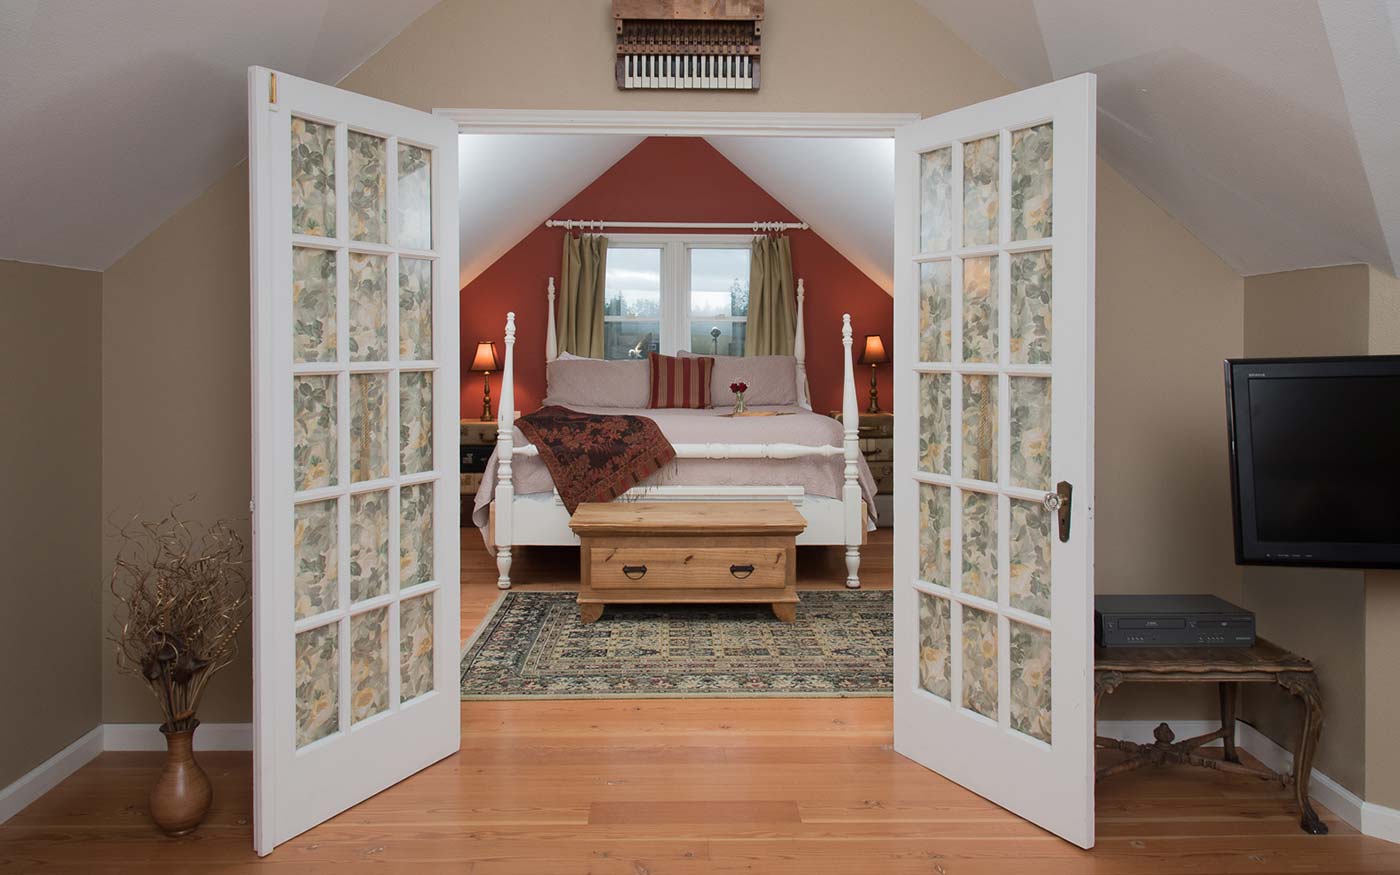 A romantic guest room at our Friday Harbor Bed and Breakfast, one of the most romantic getaways in Washington